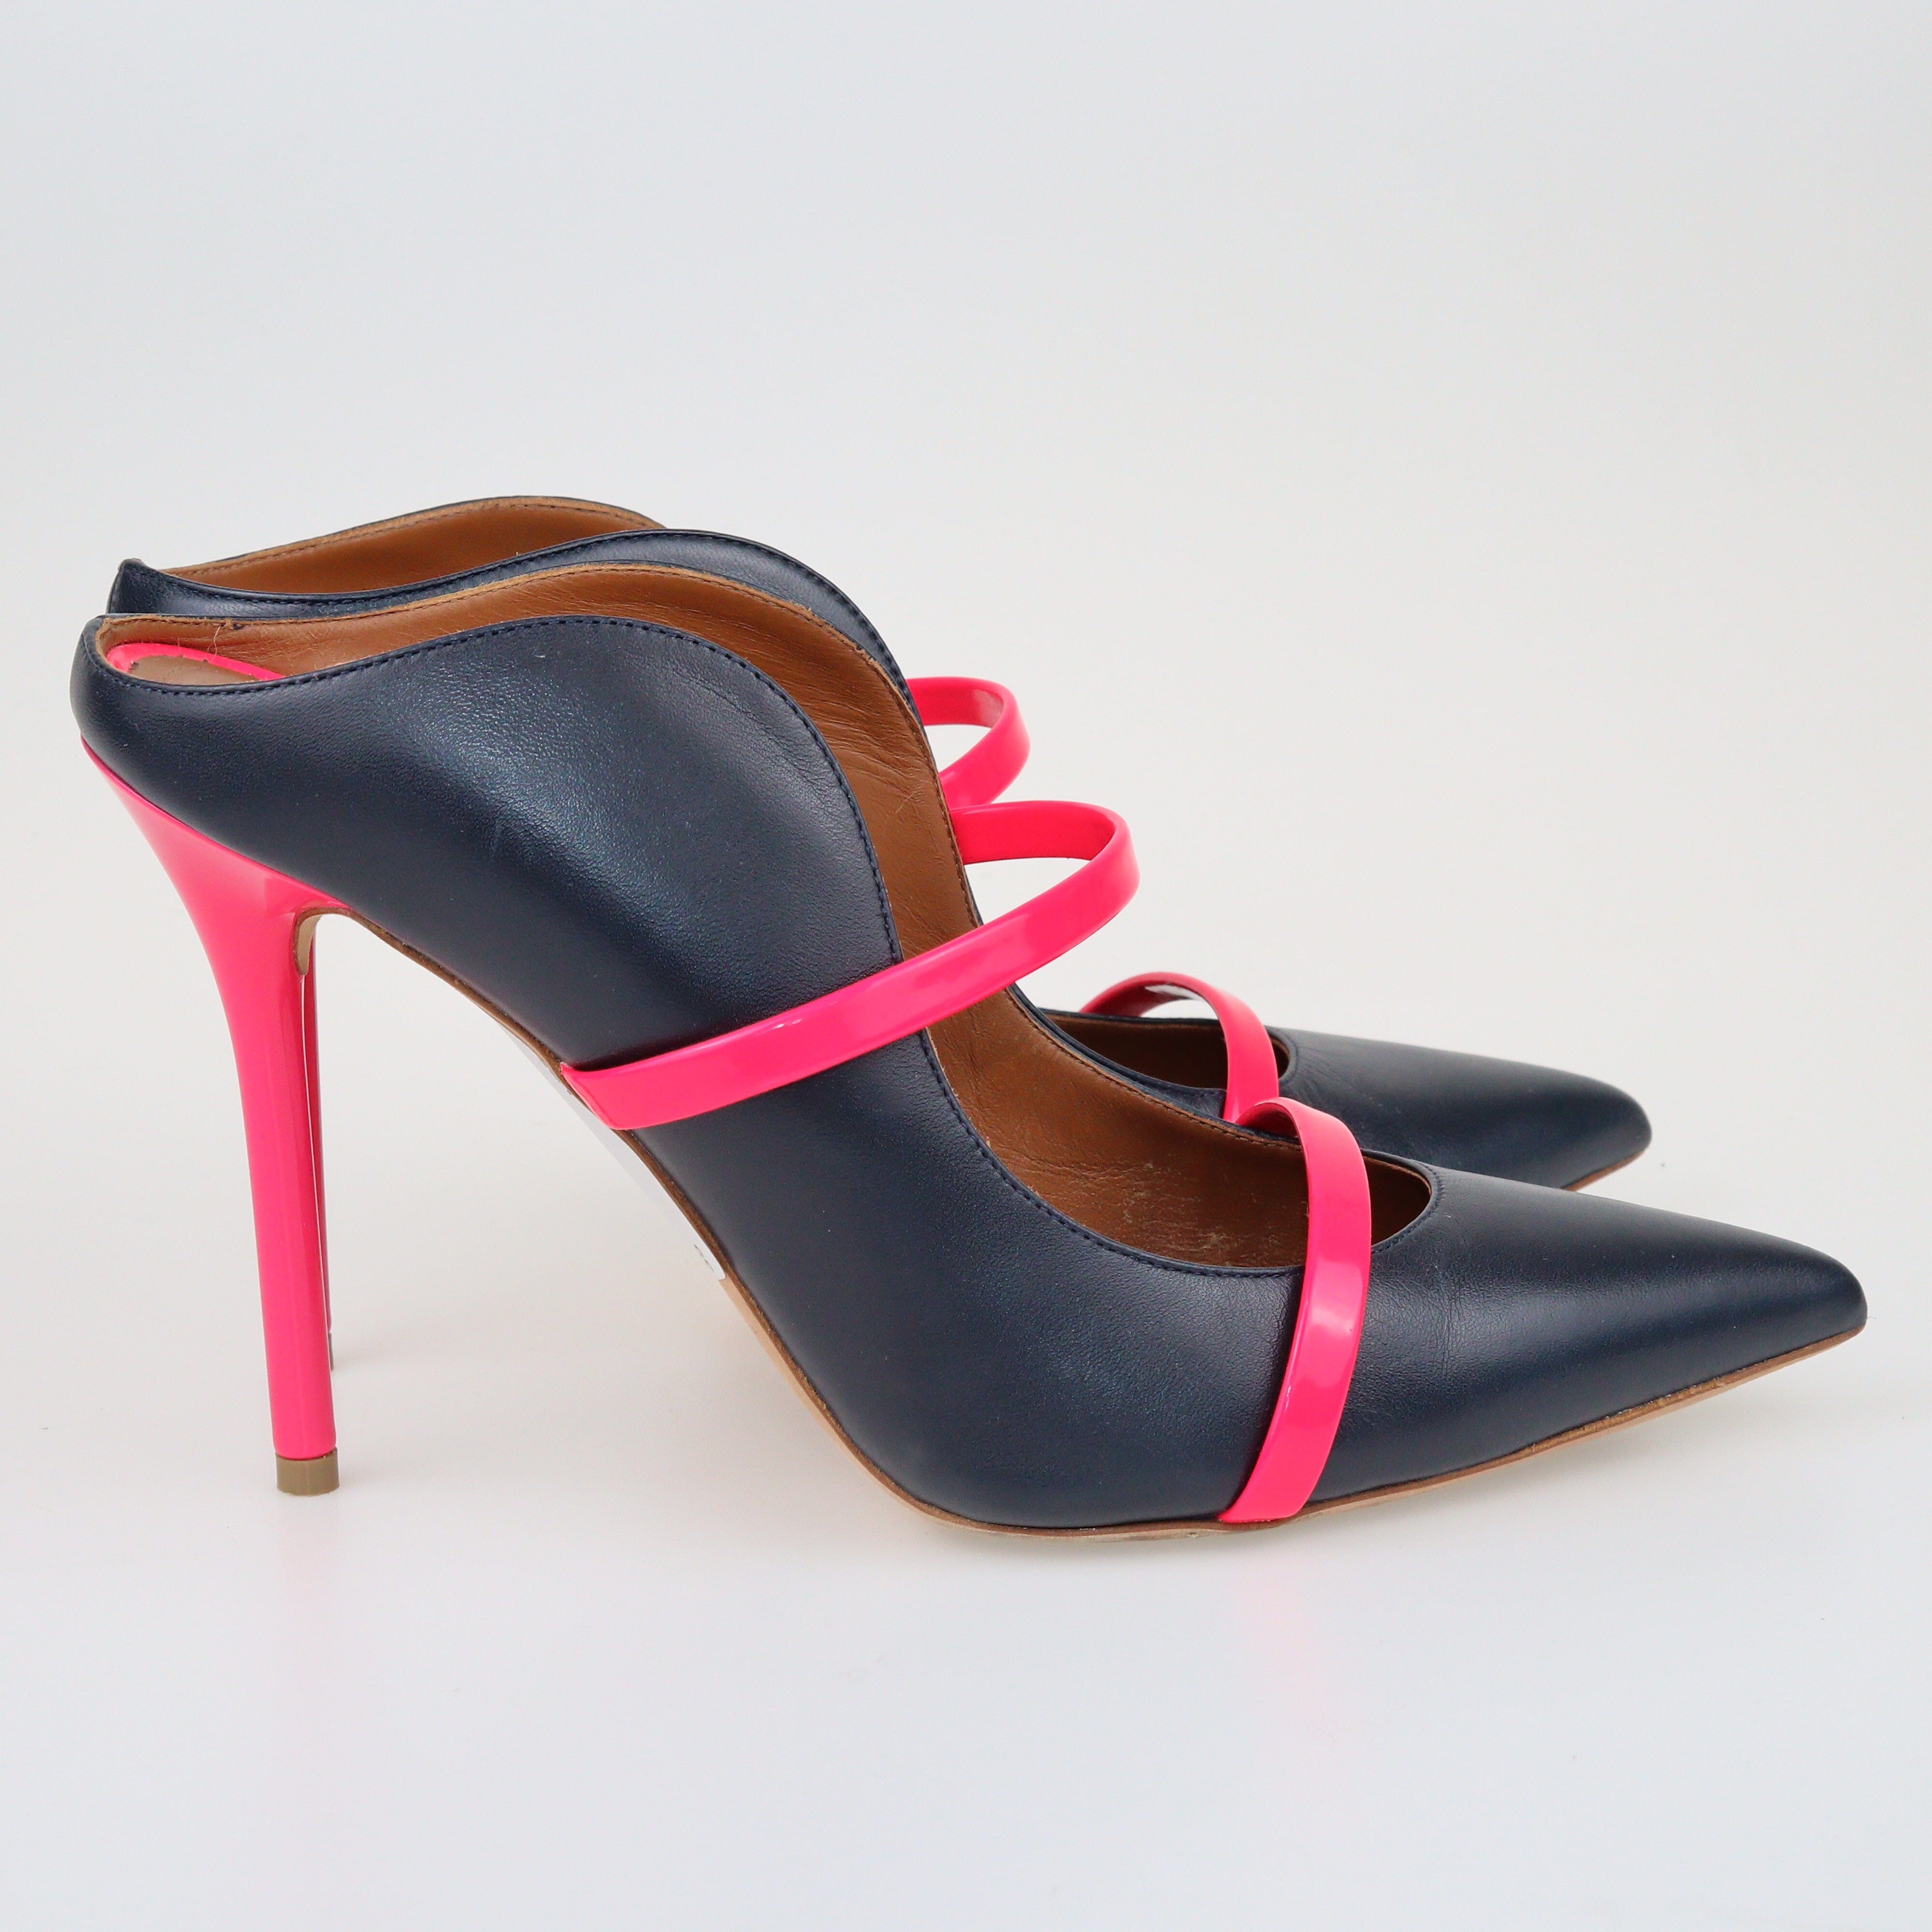 Black/Pink Maureen Mules Shoes Malone Souliers 